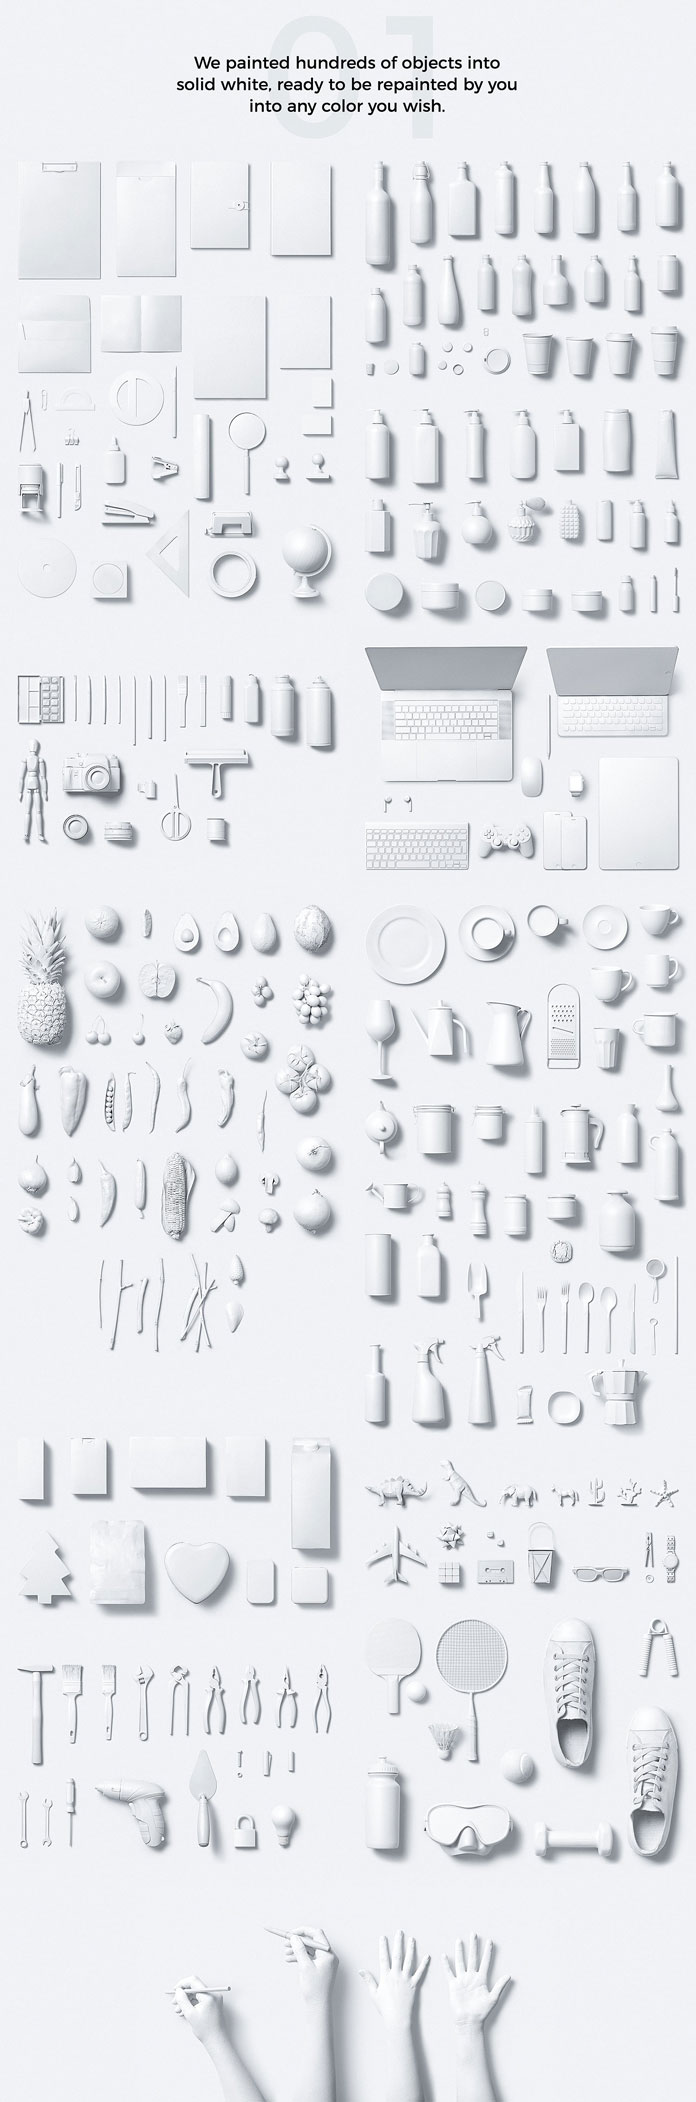 Hundreds of objects painted into solid white.